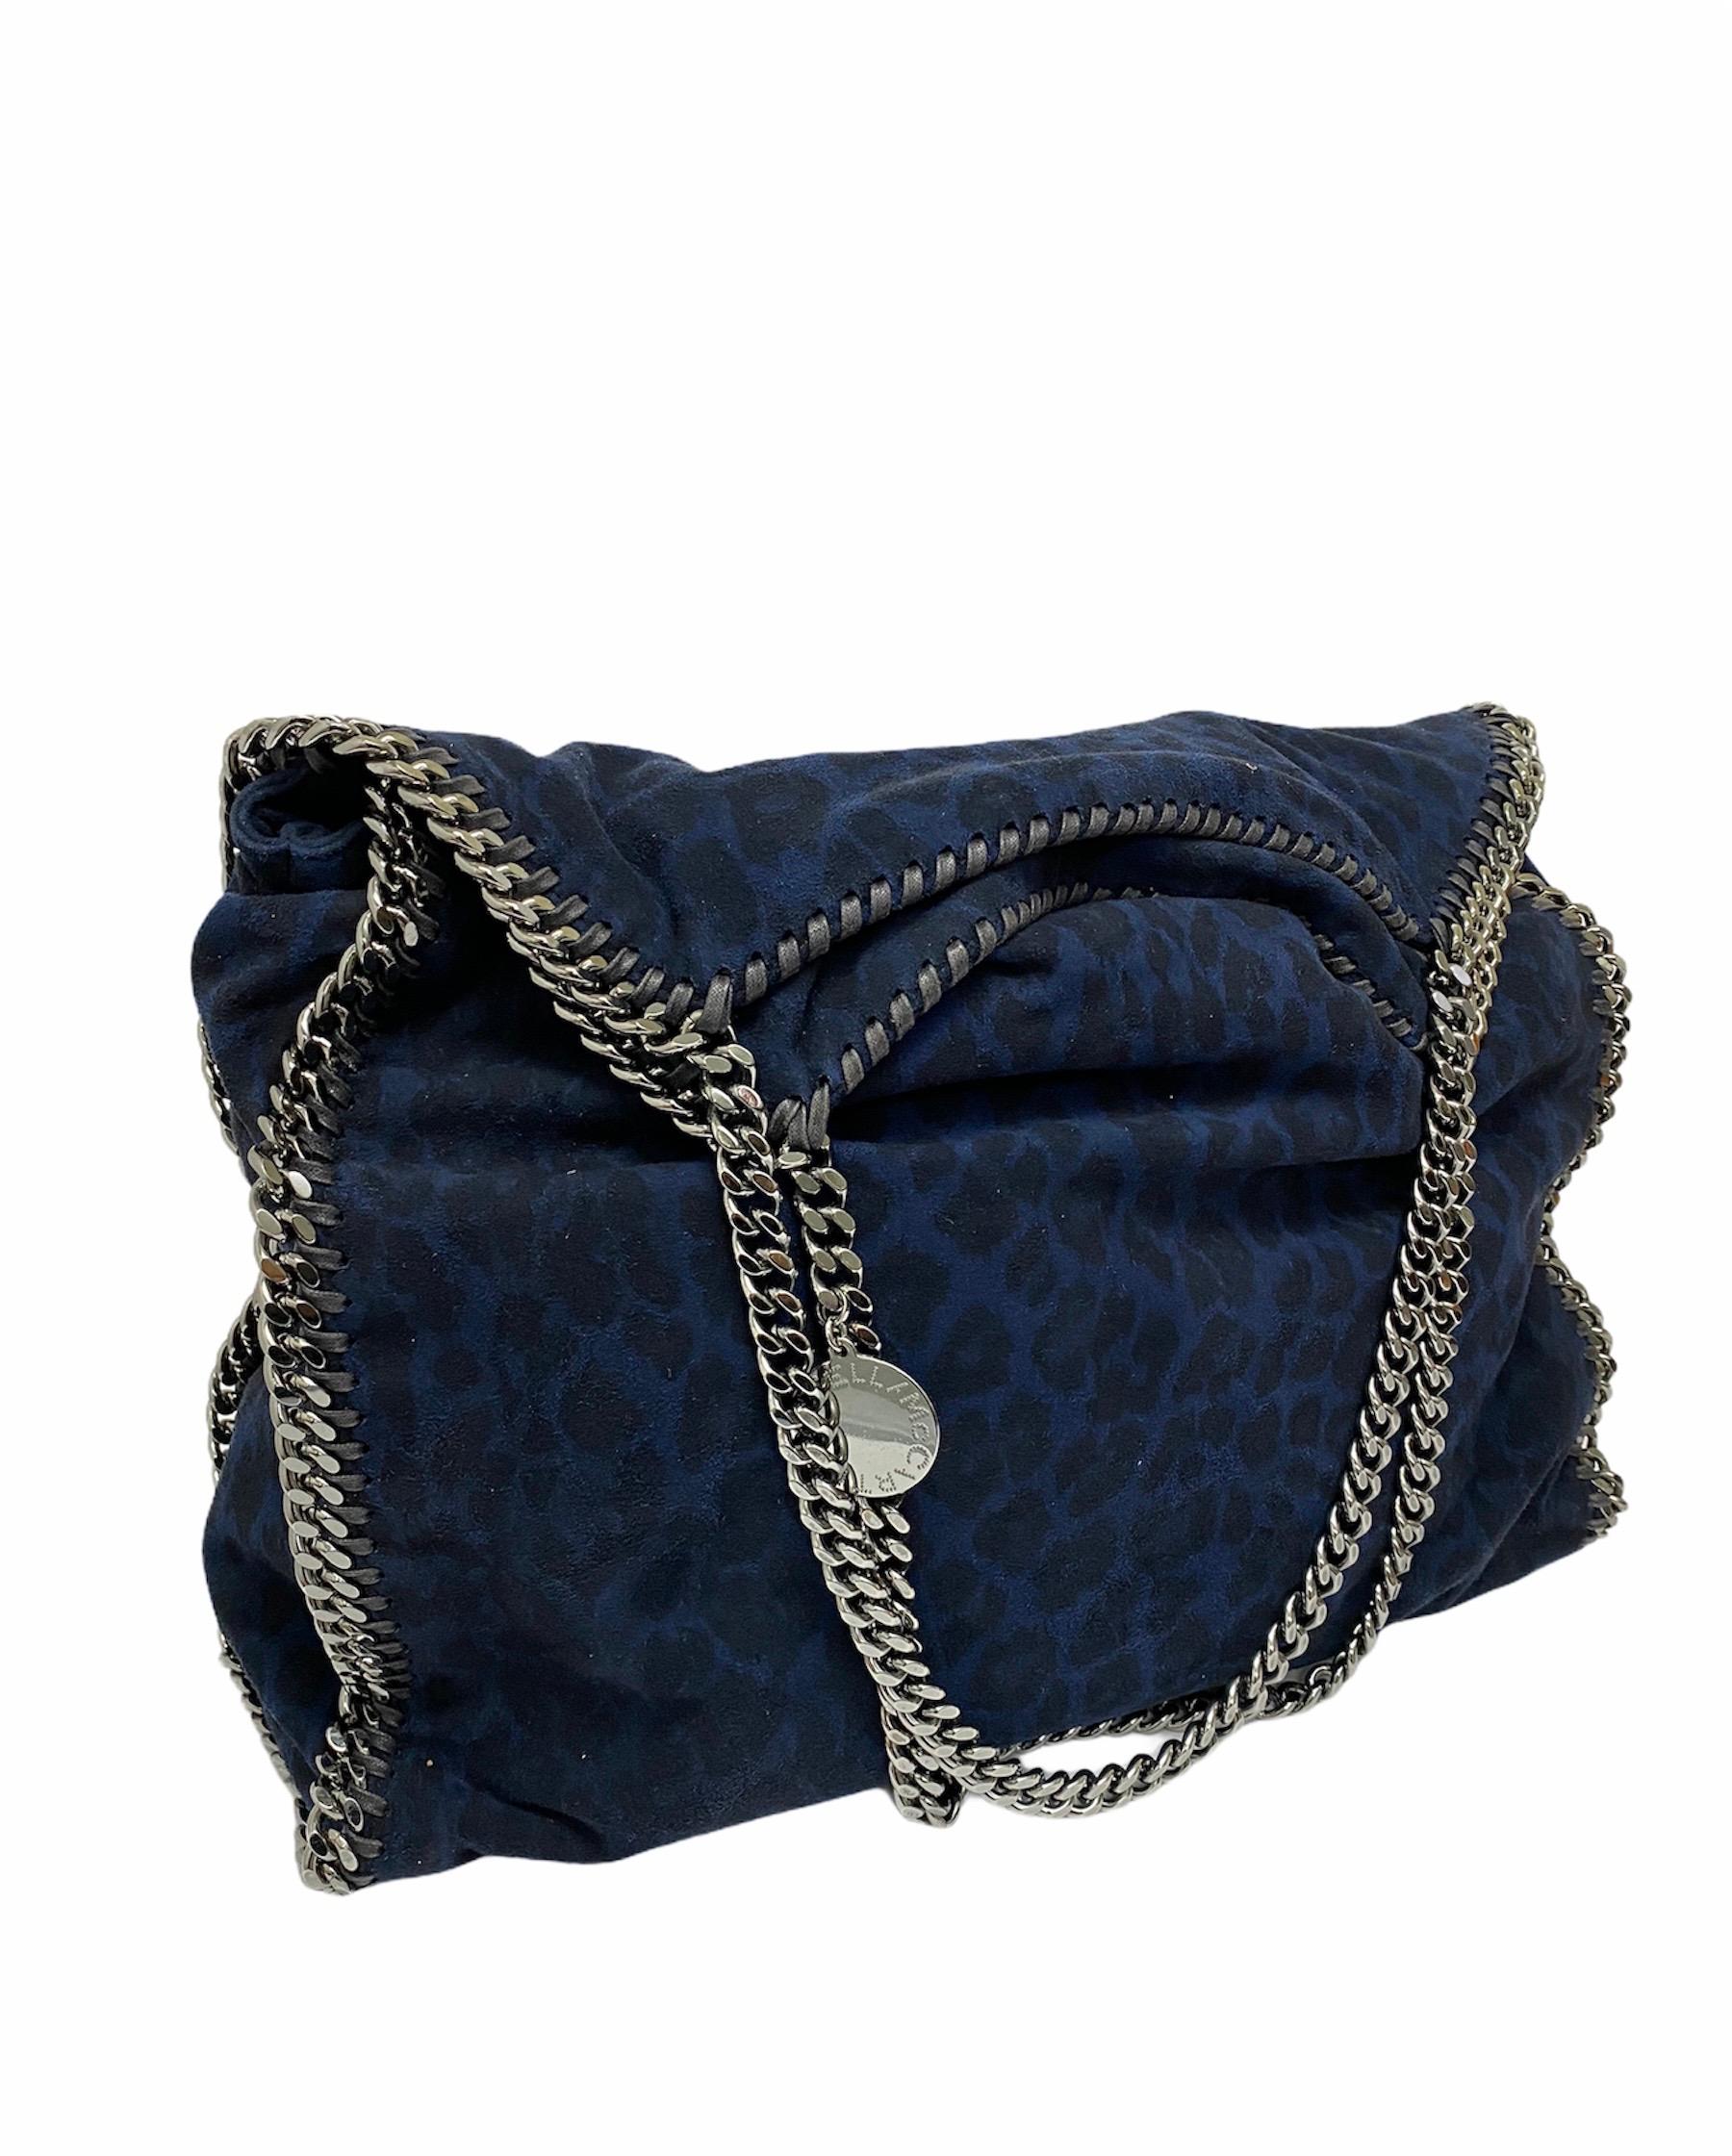 Stella McCartney bag, Falabella model, made of spotted blue suede with silver hardware. The product has a button closure, internally lined in black fabric, very roomy. It is also equipped with two chain handles, an internal zip pocket, a cell phone